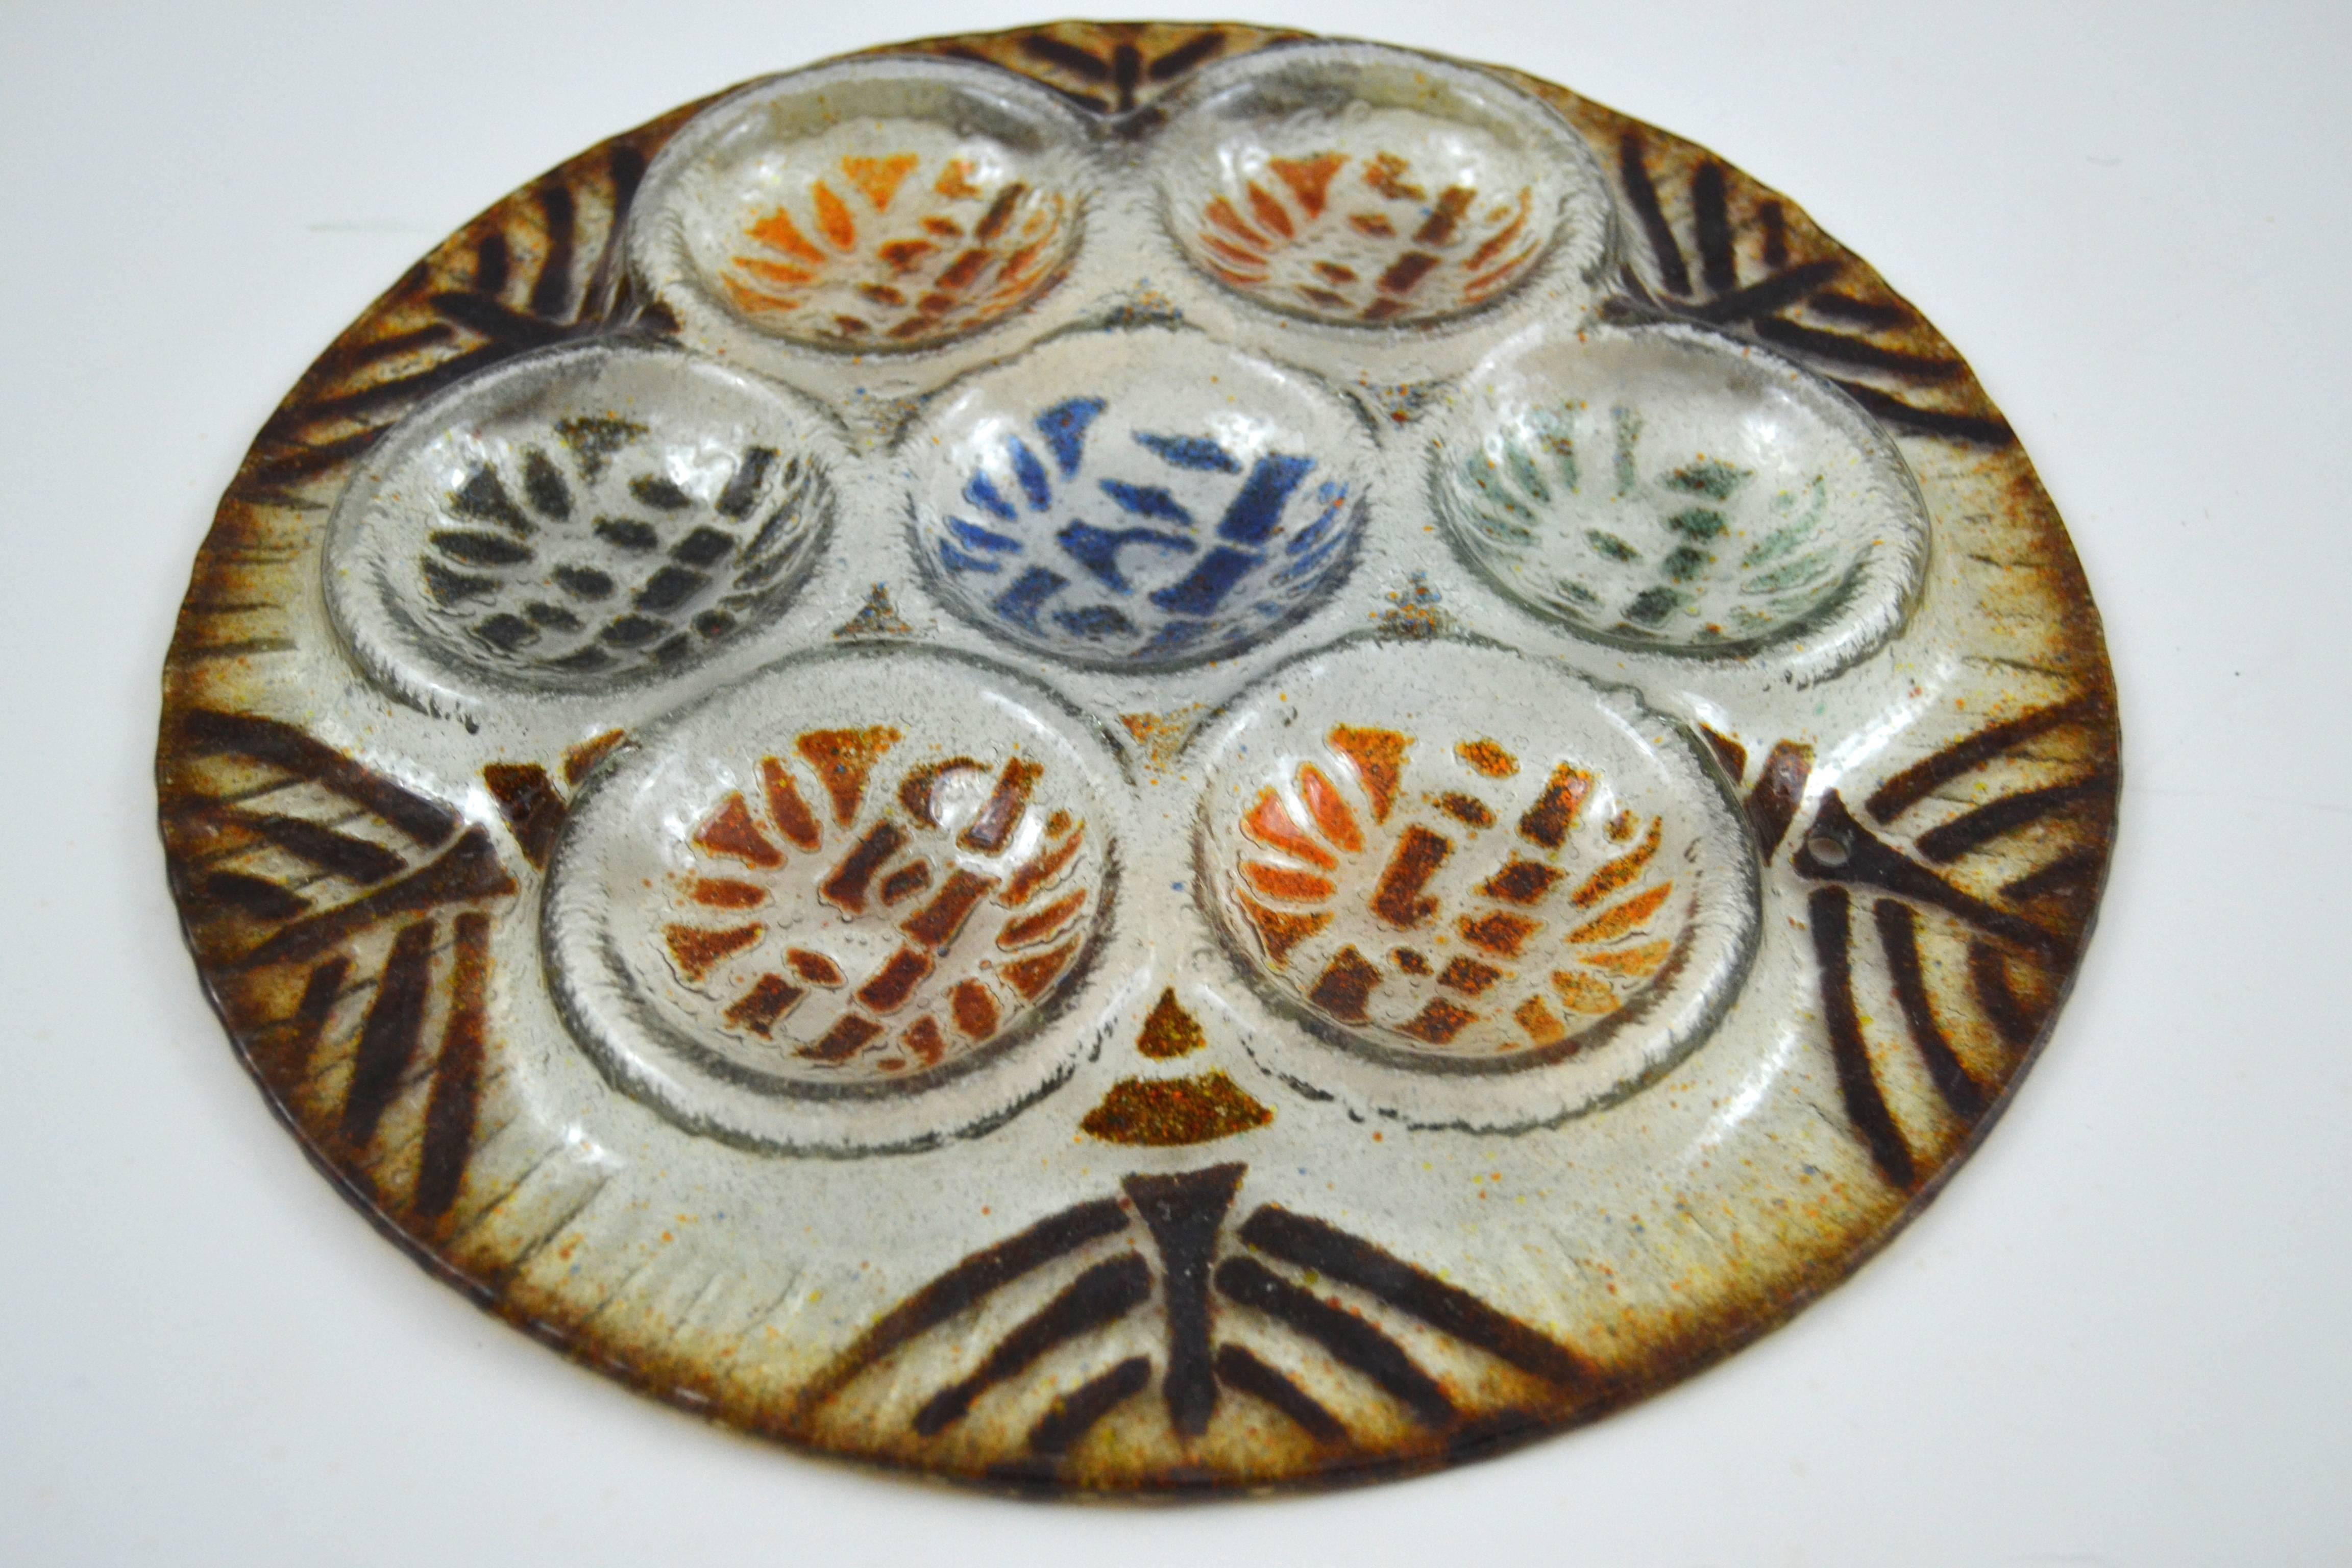 Higgins fused glass seder plate with lovely graphic designs.